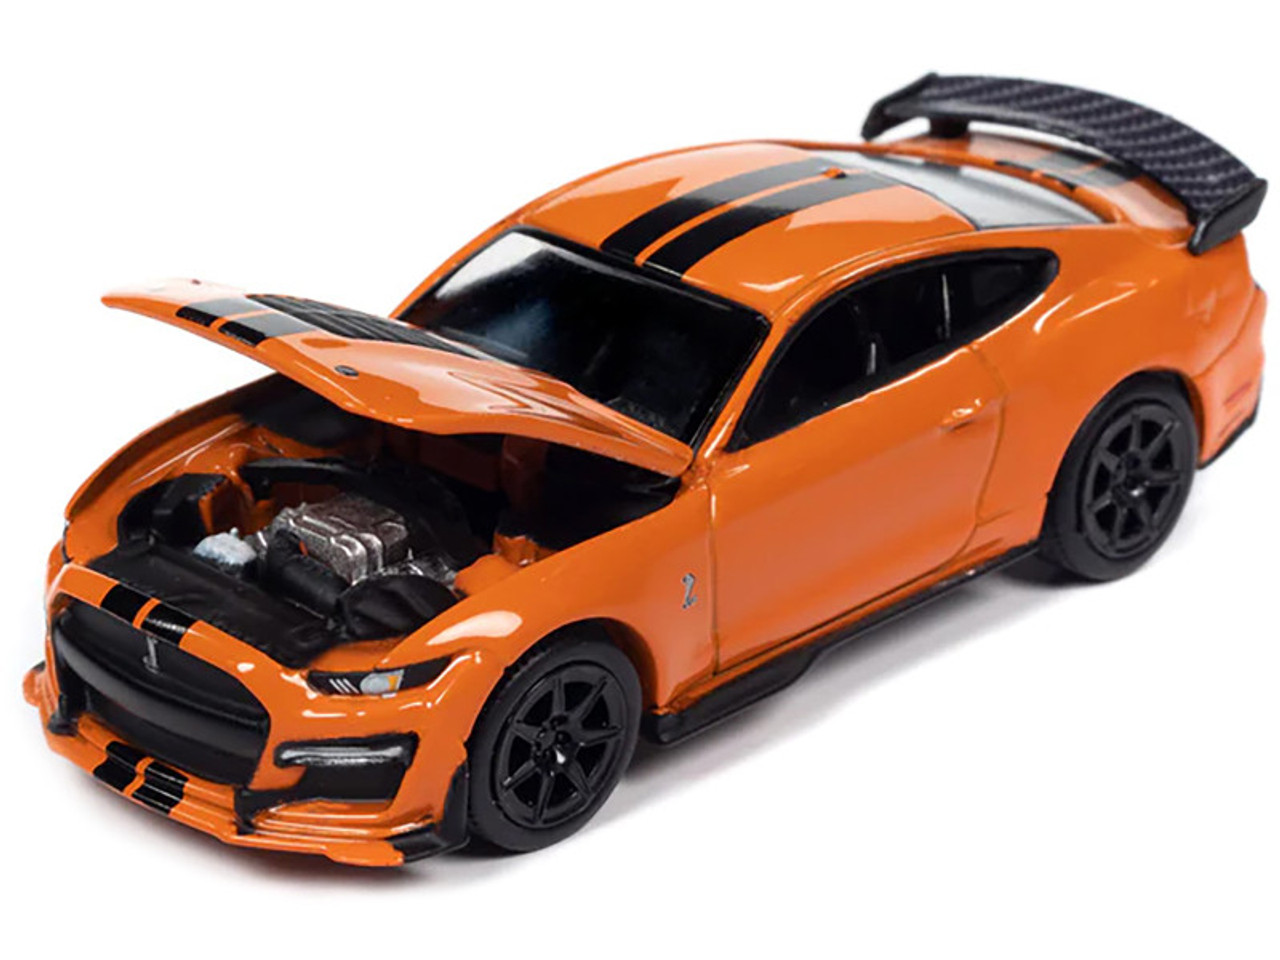 2021 Ford Mustang Shelby GT500 Carbon Fiber Track Pack Twister Orange with Black Stripes "Modern Muscle" Limited Edition 1/64 Diecast Model Car by Auto World